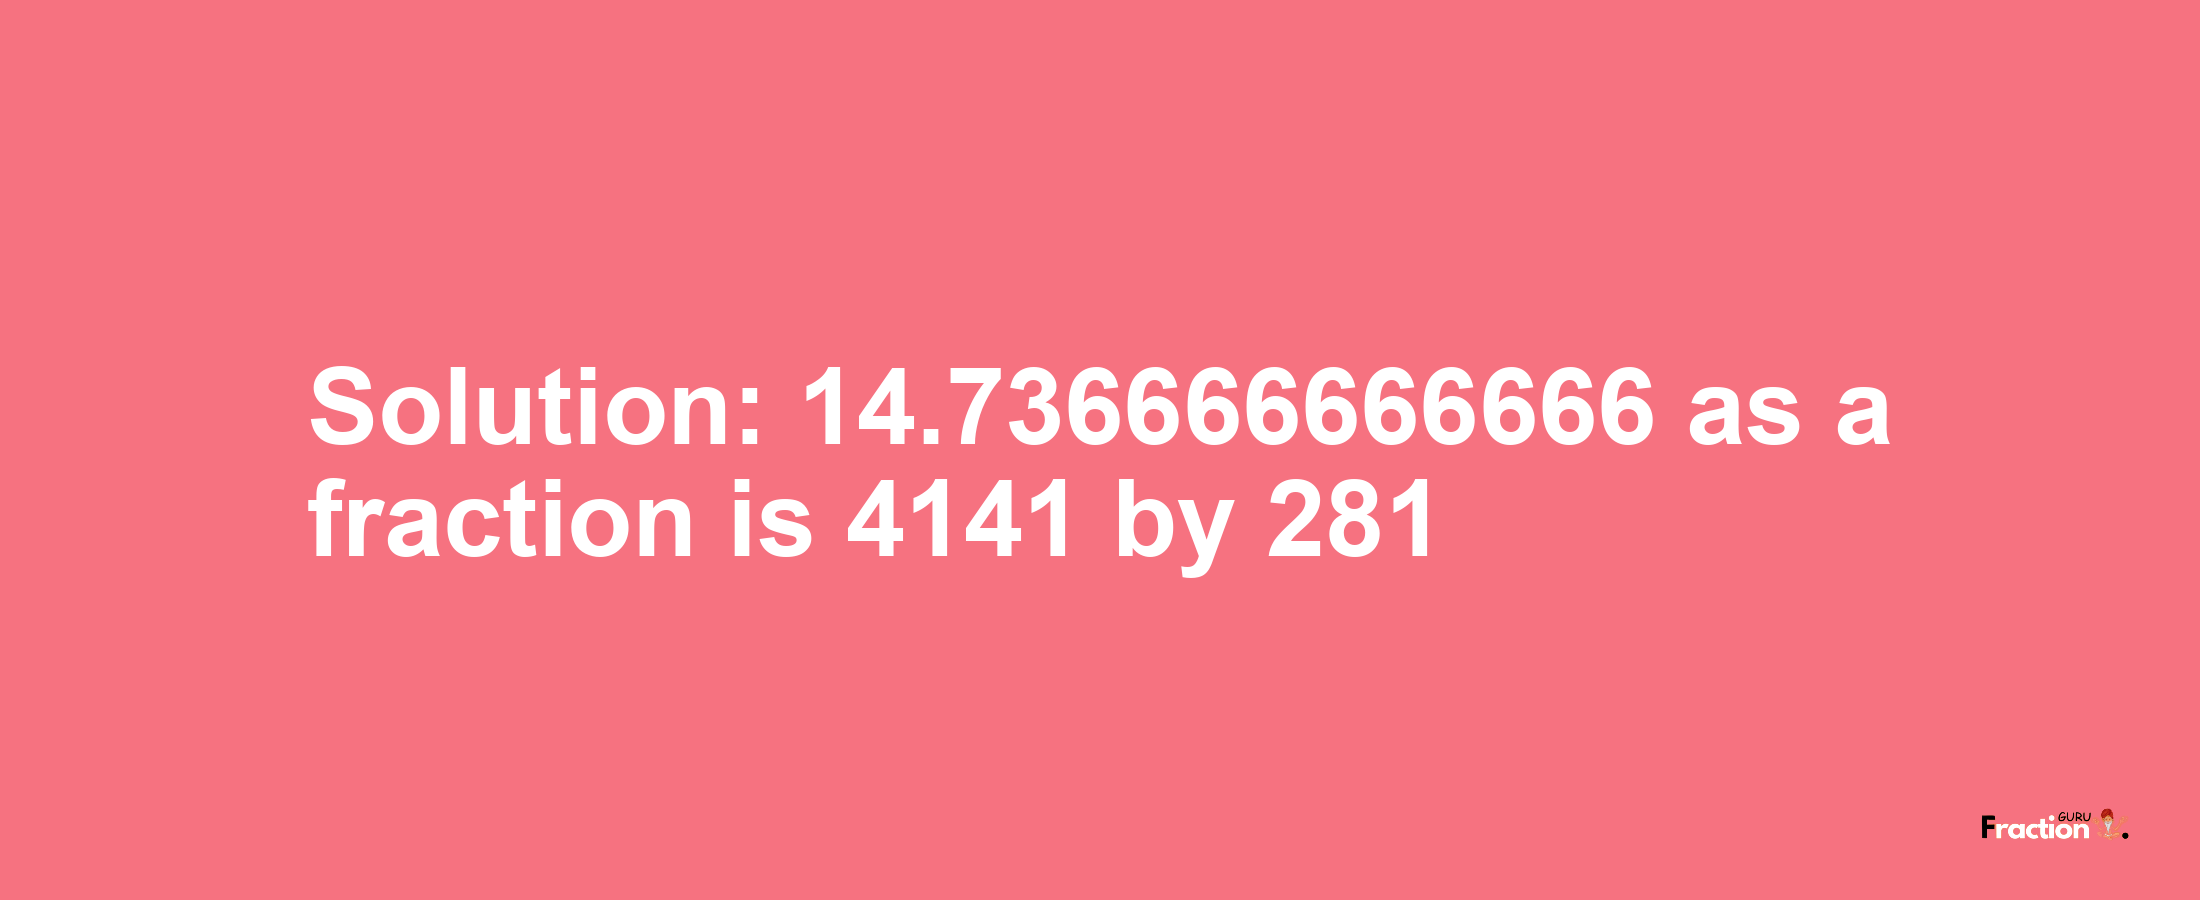 Solution:14.736666666666 as a fraction is 4141/281